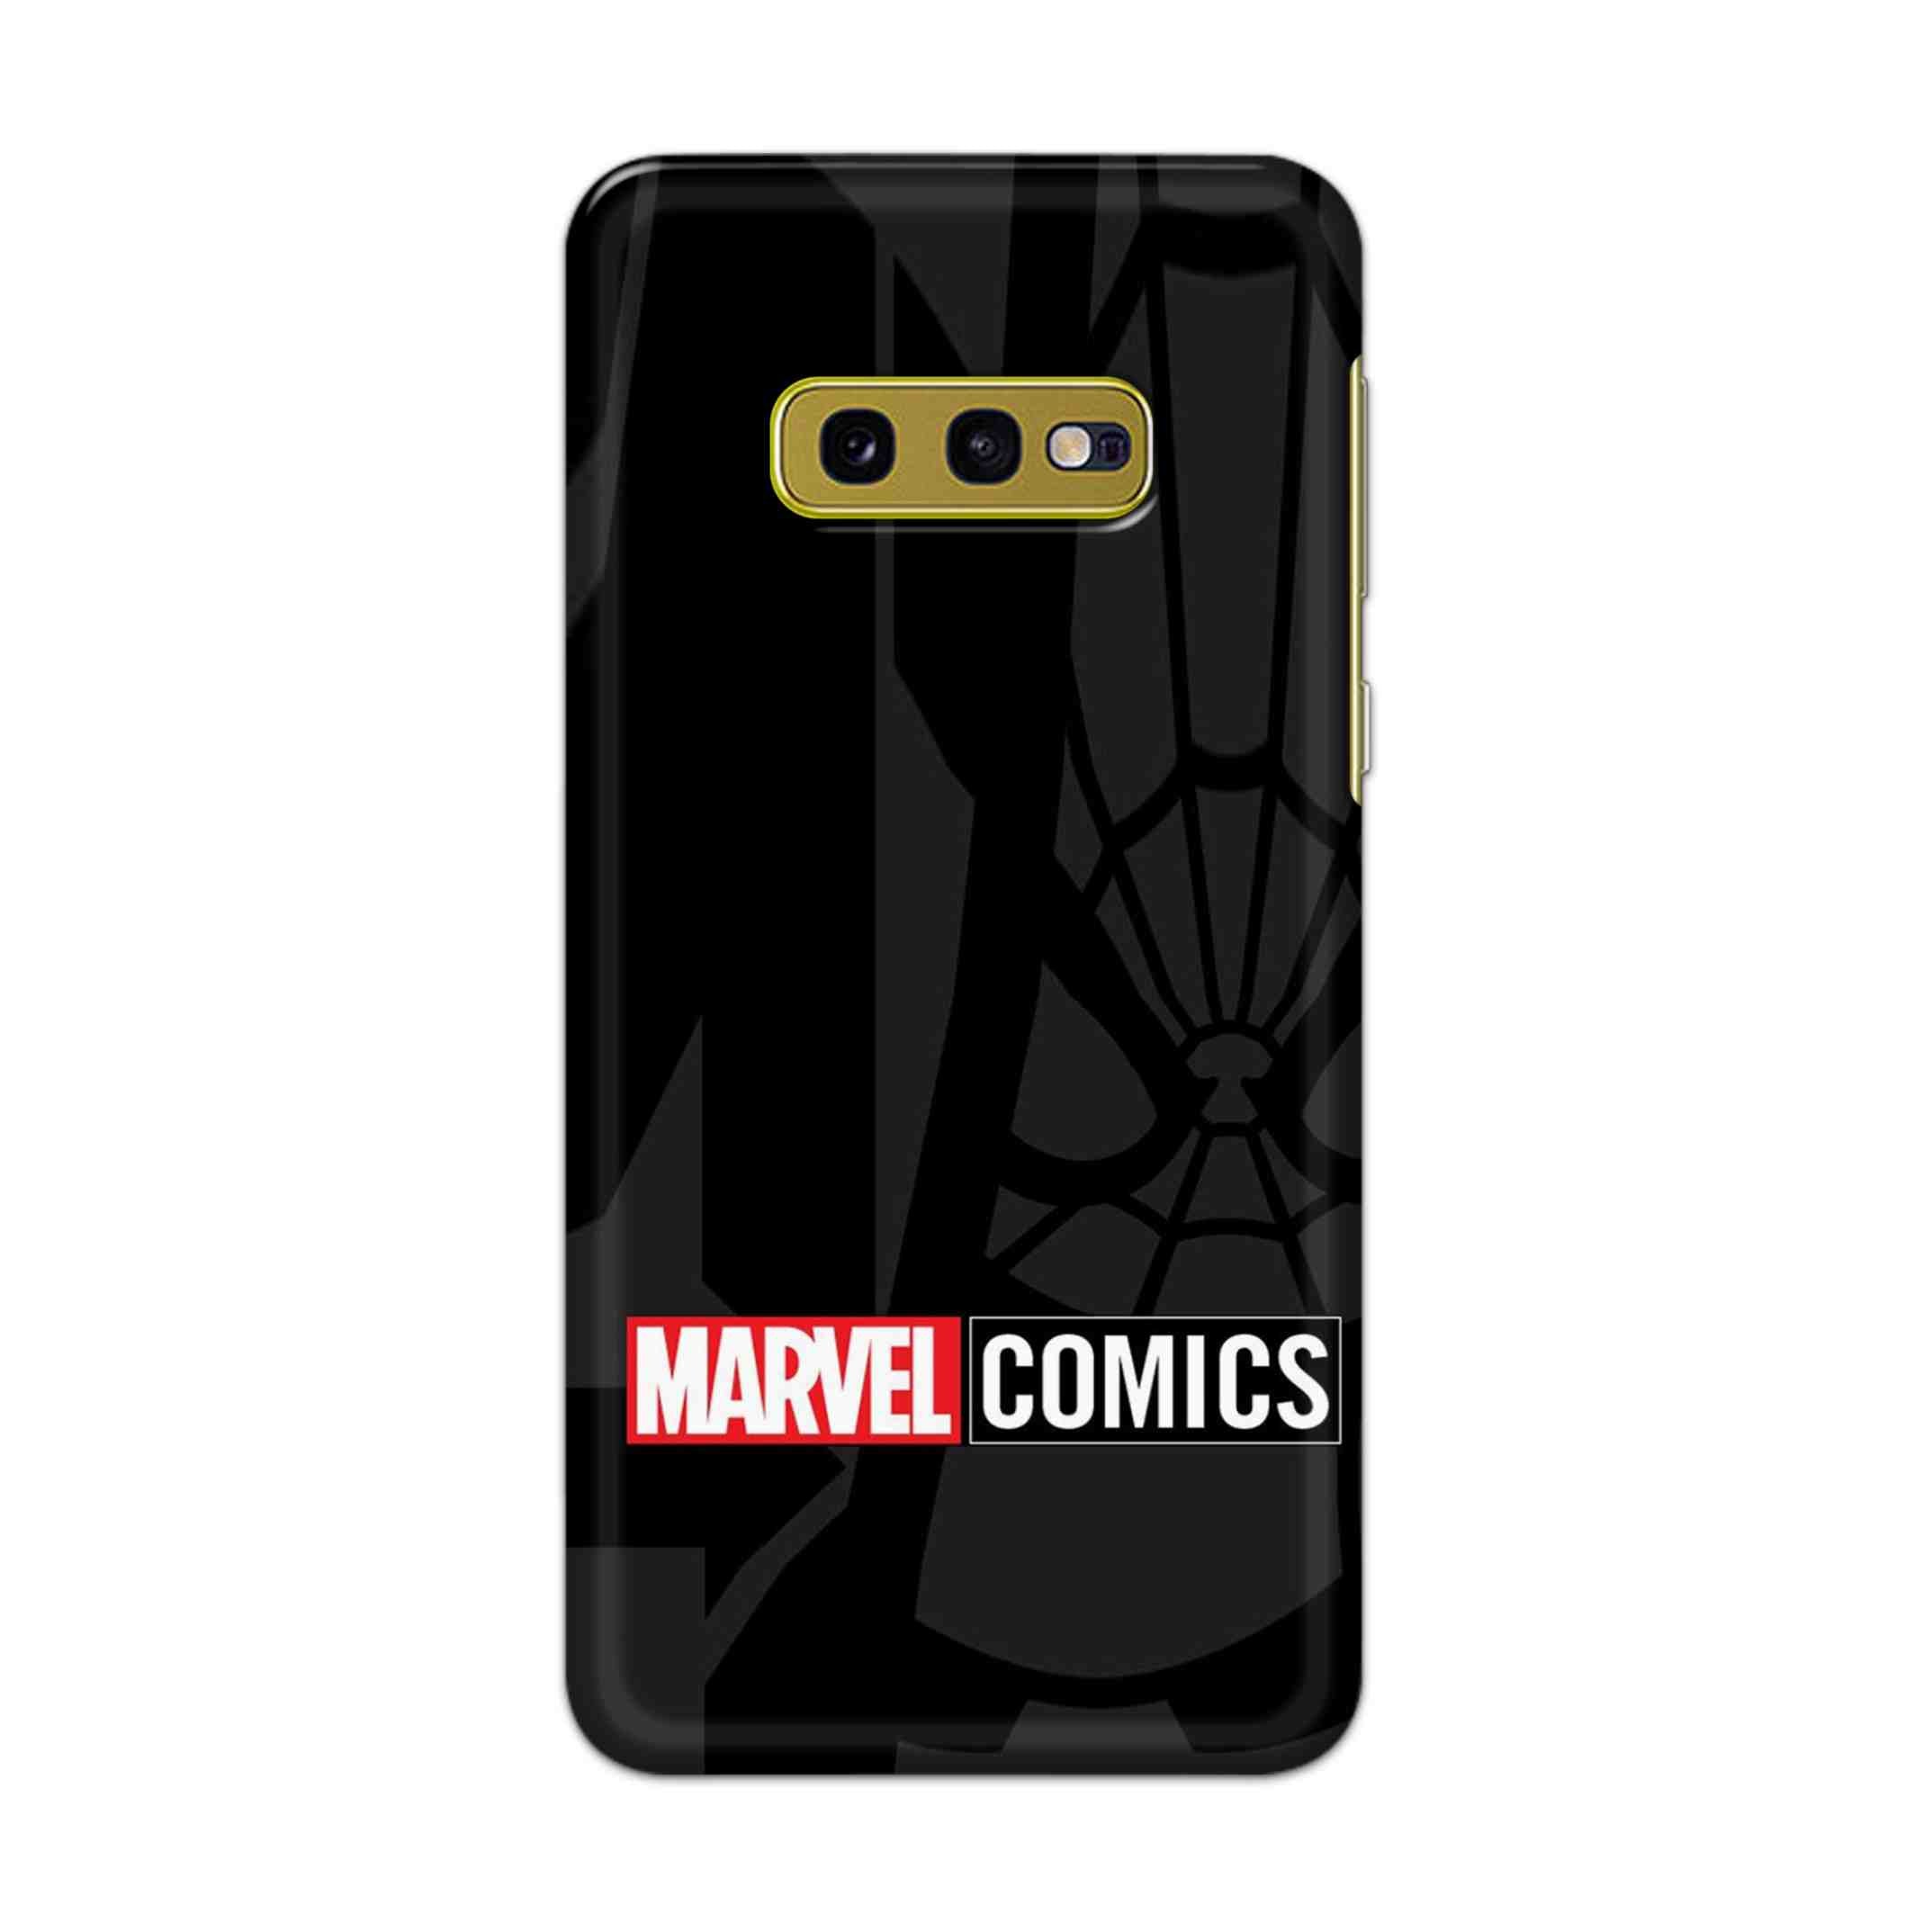 Buy Marvel Comics Hard Back Mobile Phone Case Cover For Samsung Galaxy S10e Online